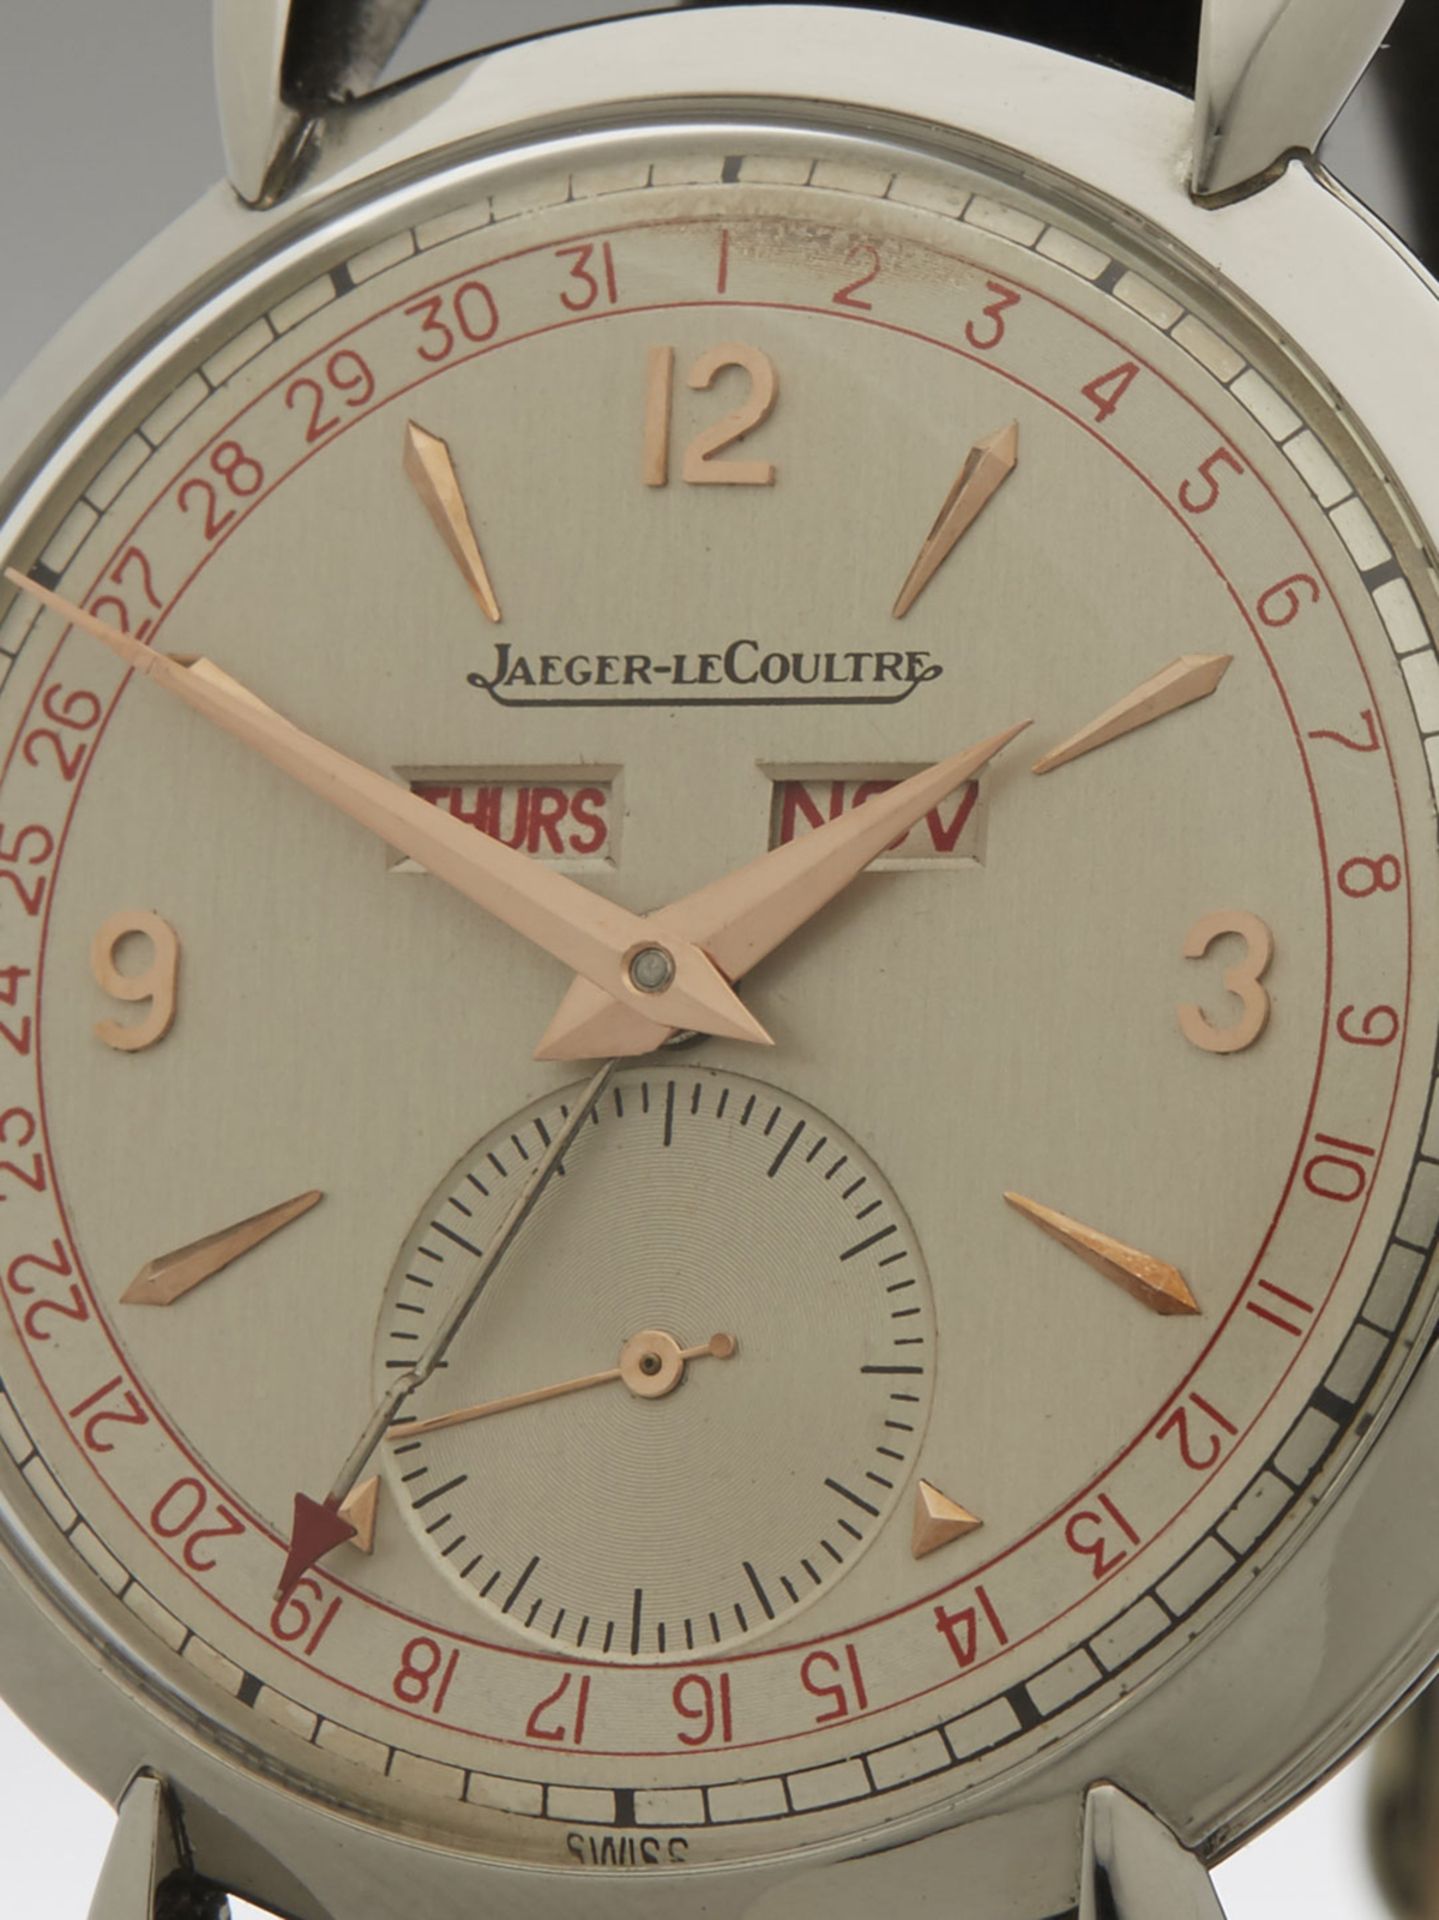 Jaeger-lecoultre Vintage 36mm Stainless Steel - Image 4 of 11